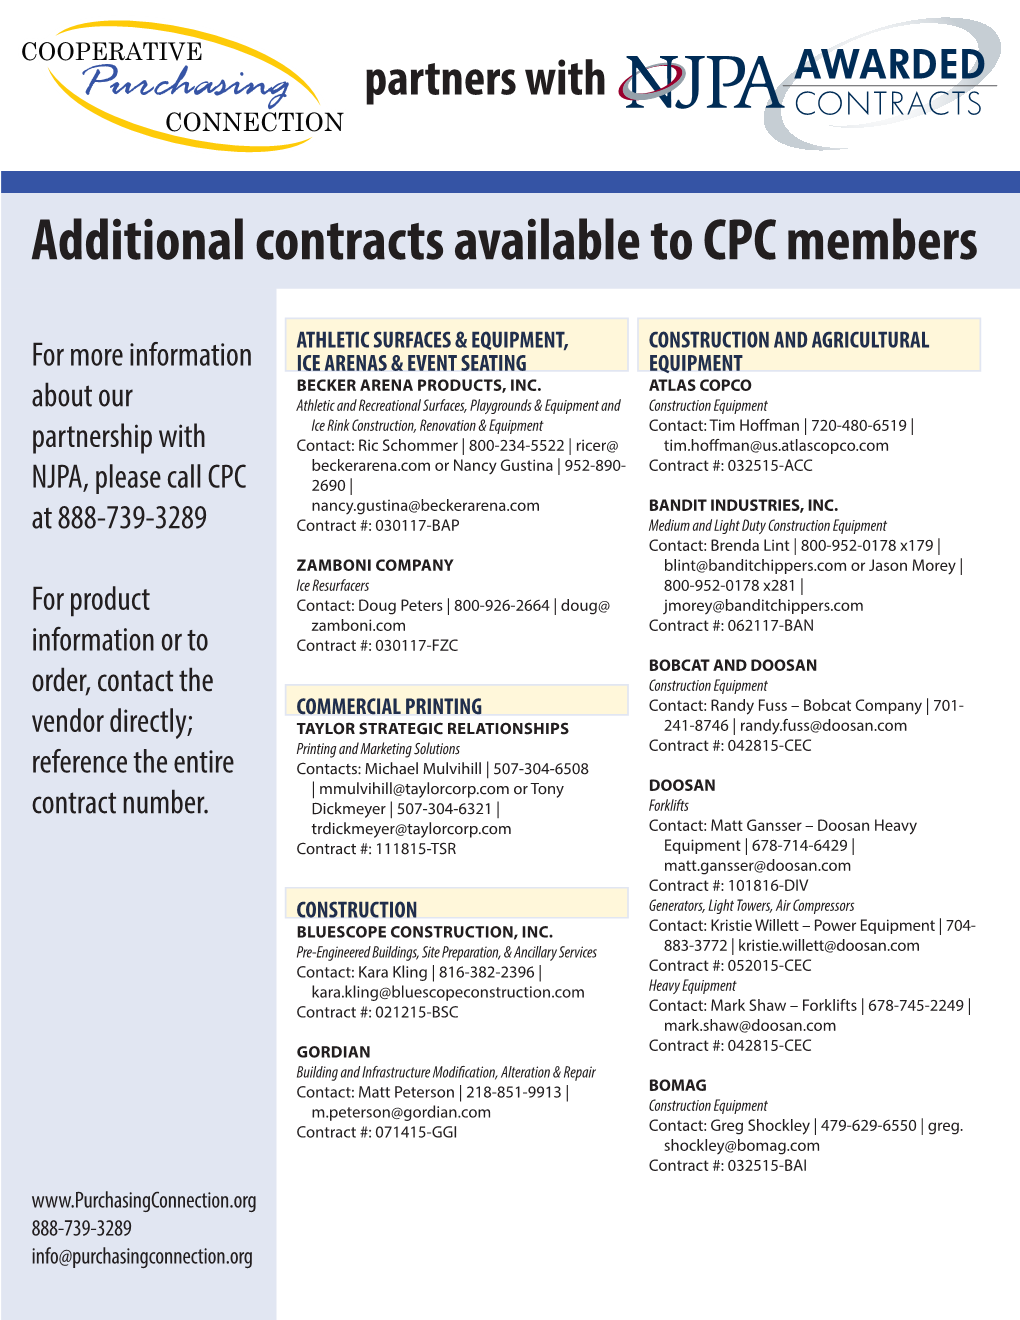 Additional Contracts Available to CPC Members